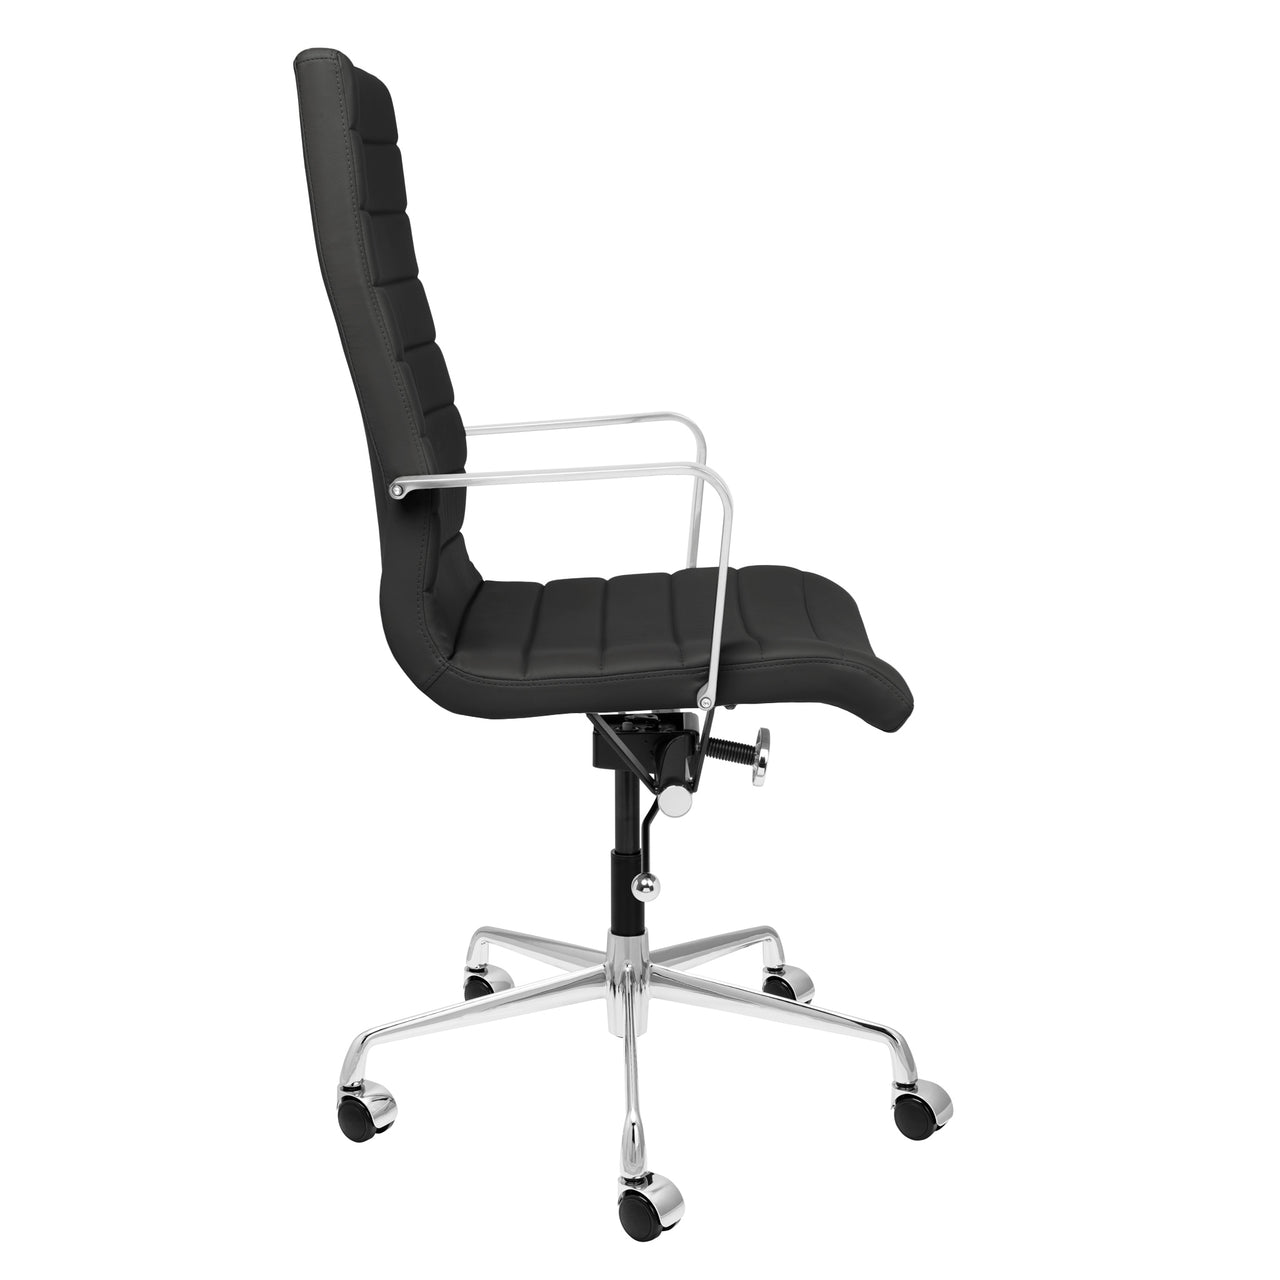 SOHO II Tall Back Ribbed Management Chair (Black)